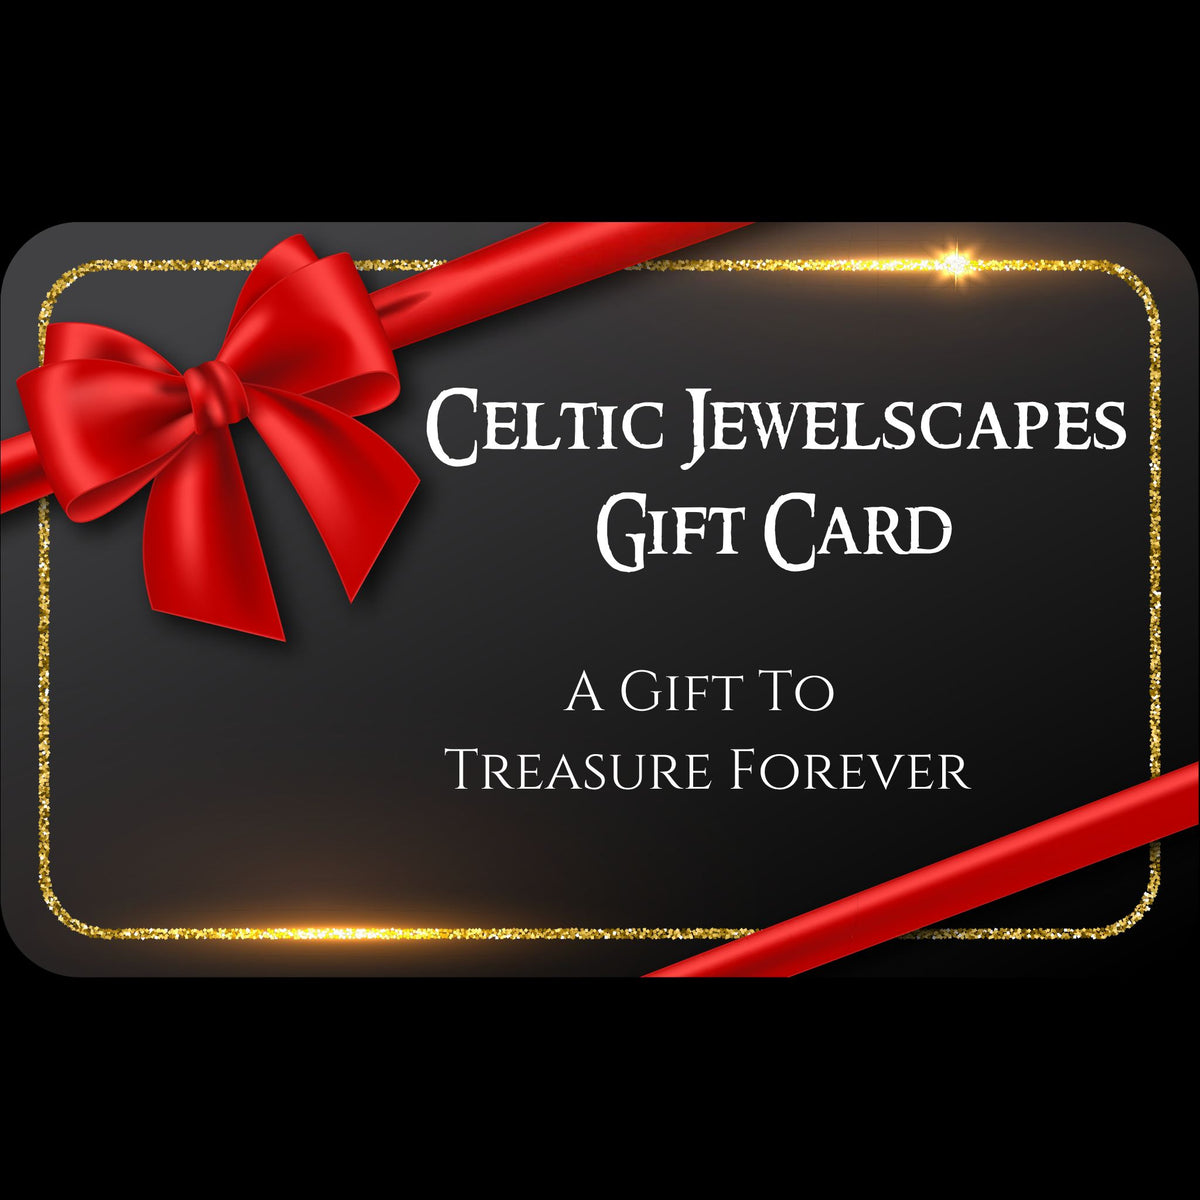 Celtic Jewelscapes Gift Cards